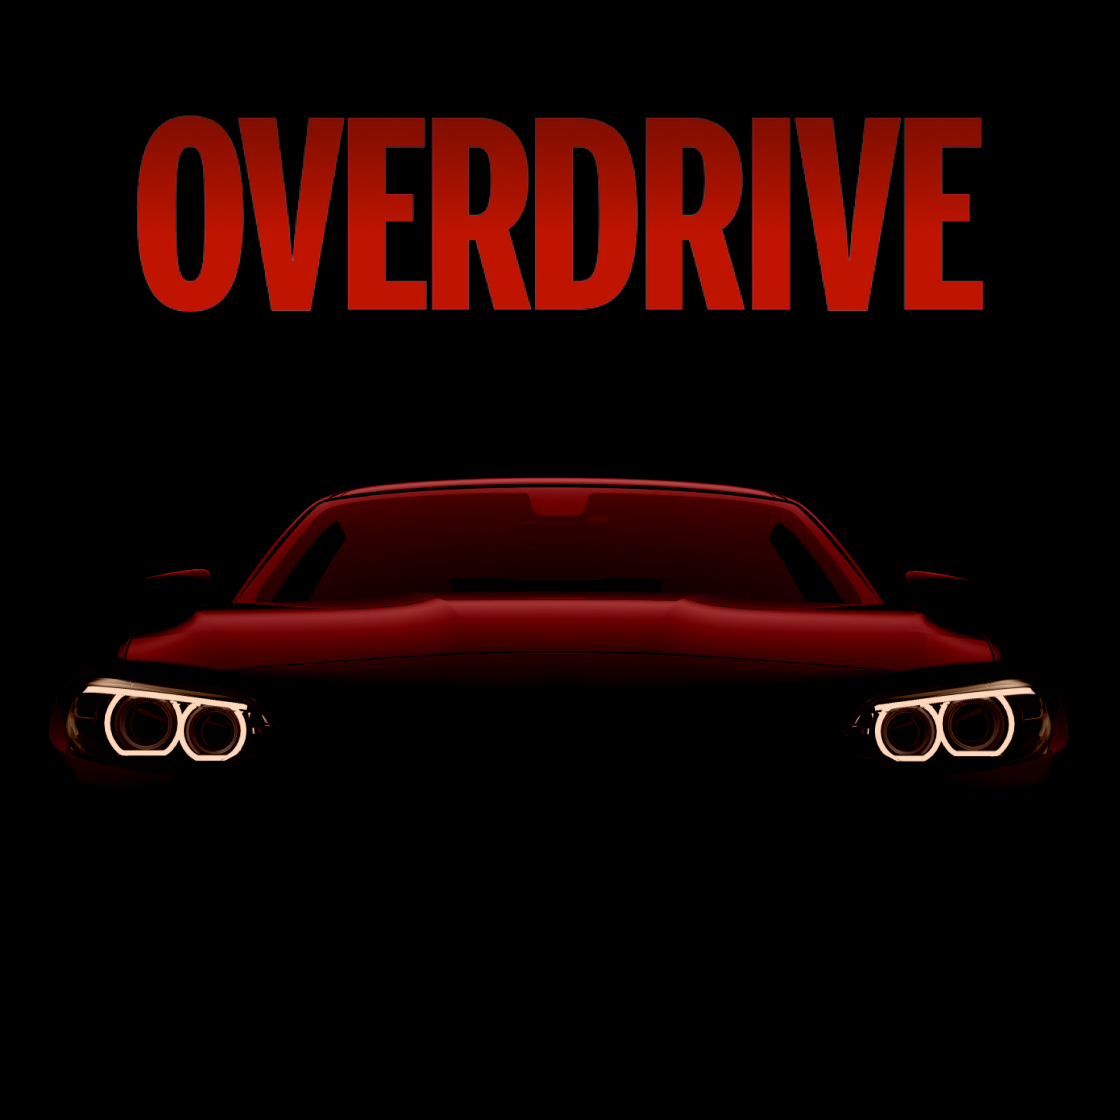 Overdrive cover square